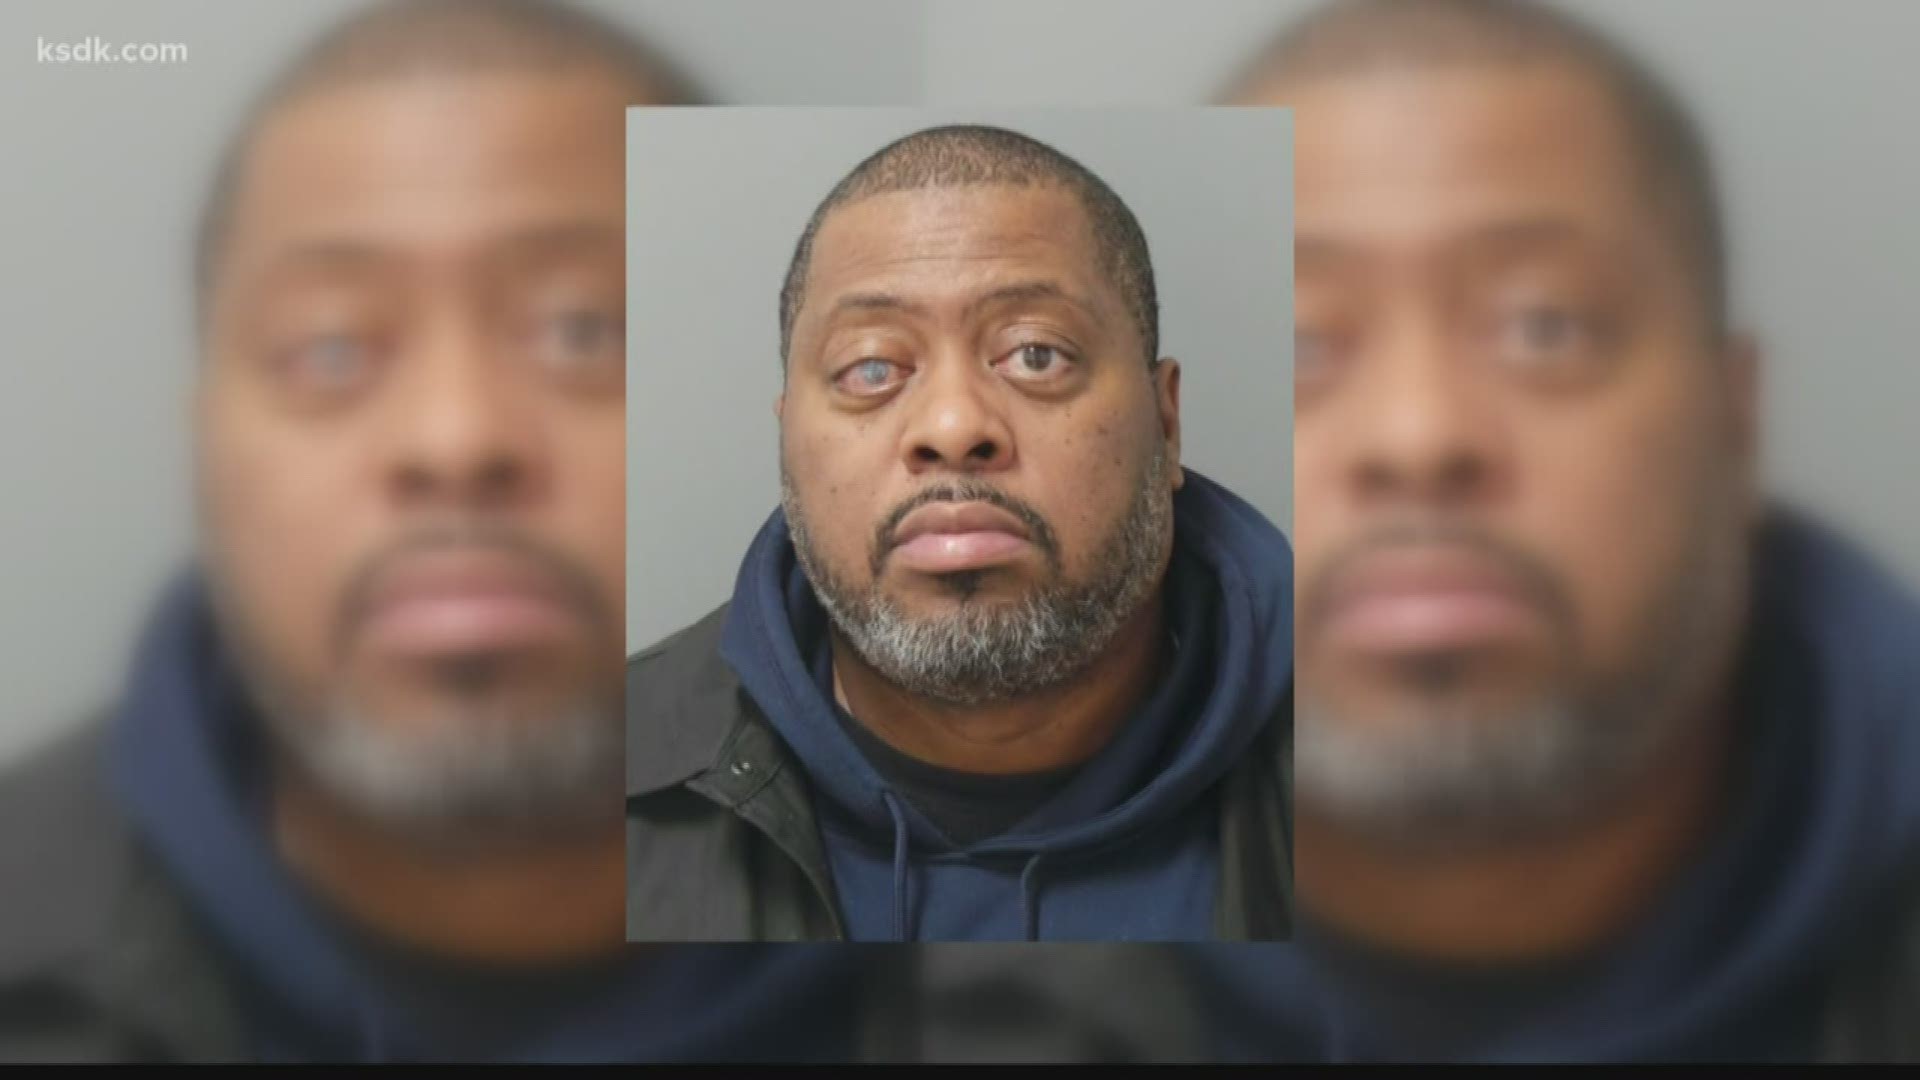 Bernard Edward Kimple, 57, recently was an employee at Morgan Ford Massage & Spa in Soulard. A client is accusing him of touching her inappropriately